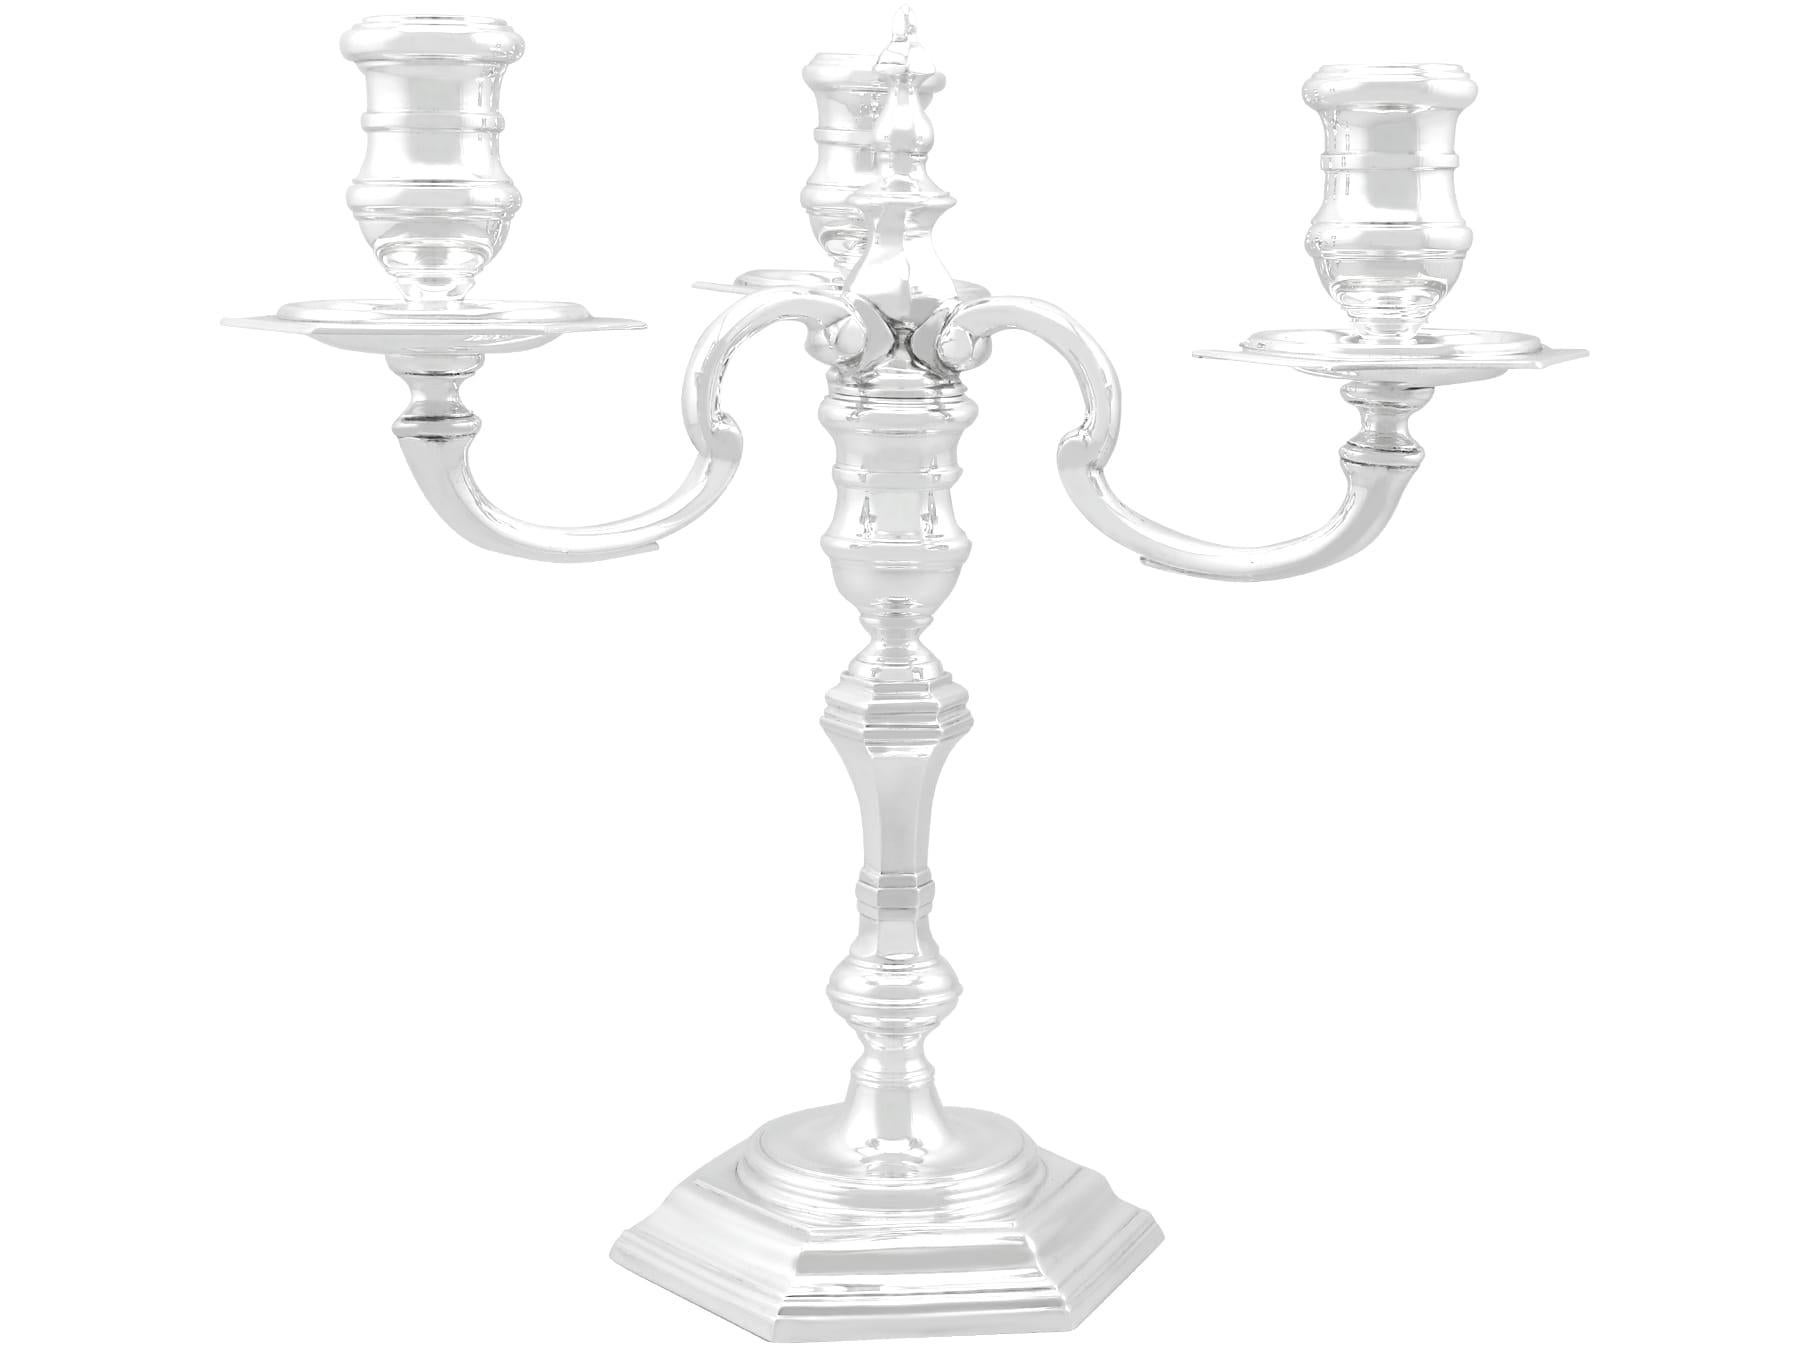 Vintage Sterling Silver Three Light Candelabra In Excellent Condition For Sale In Jesmond, Newcastle Upon Tyne